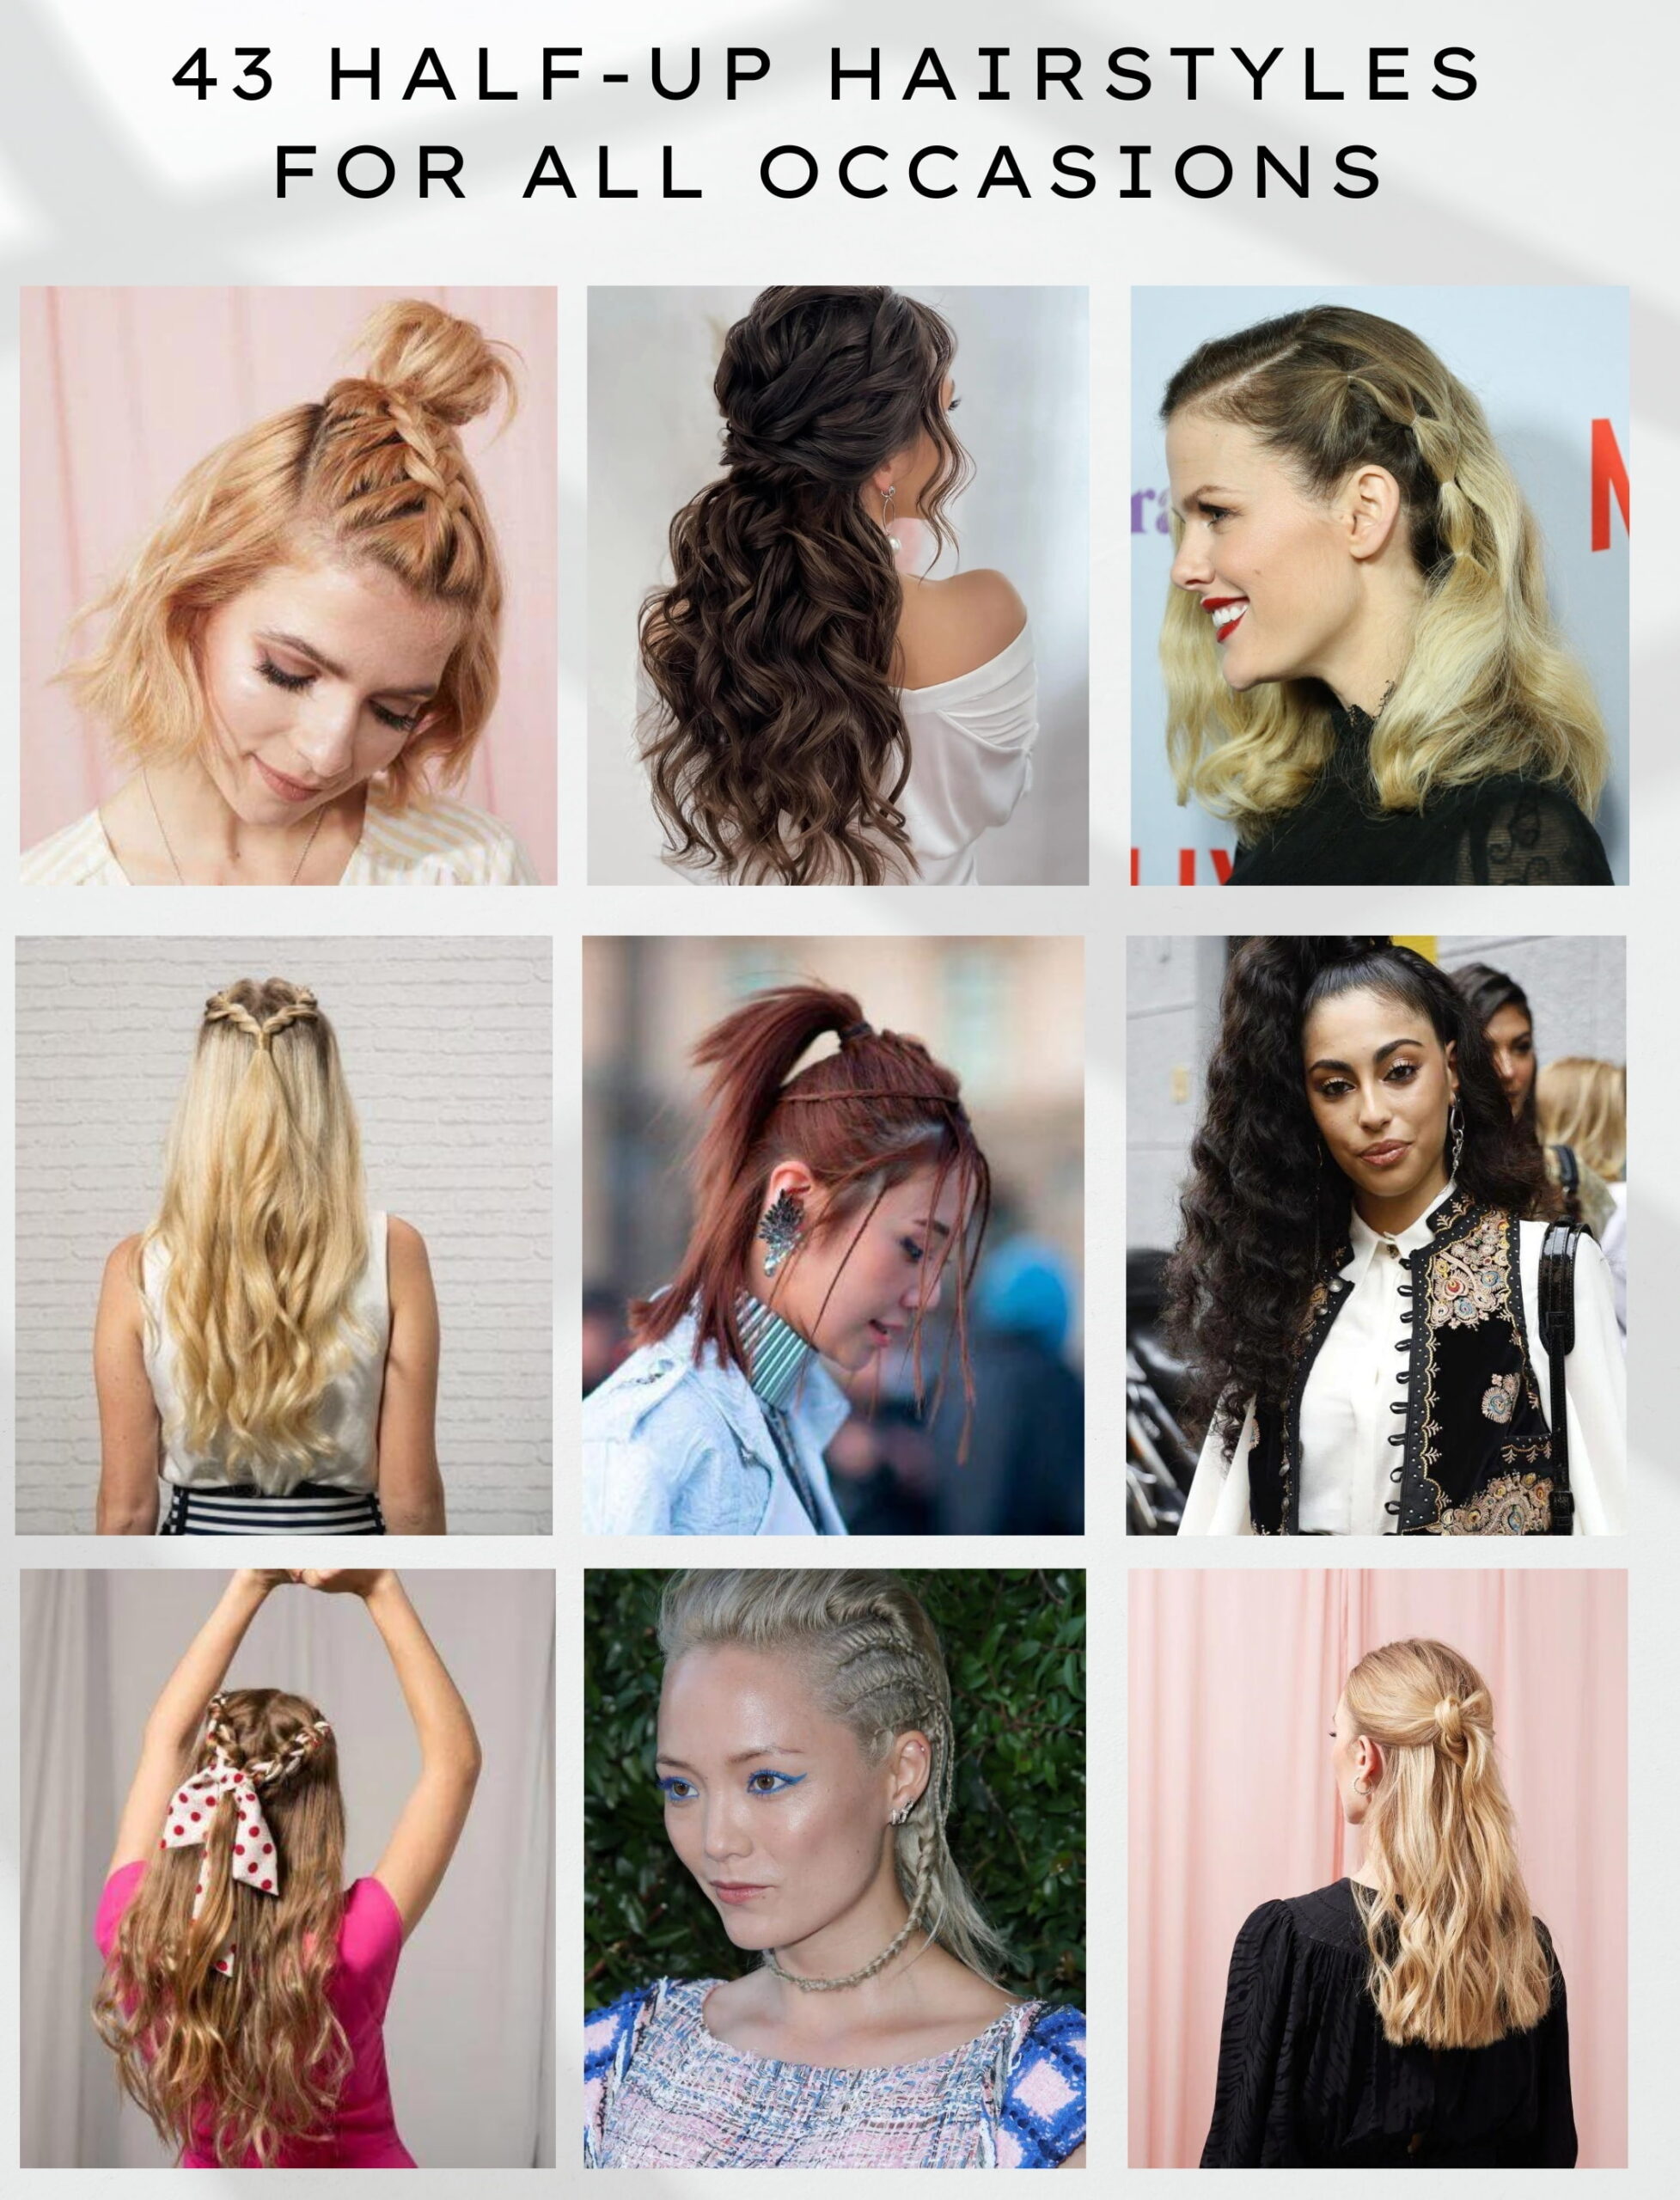 Half-up hairstyles